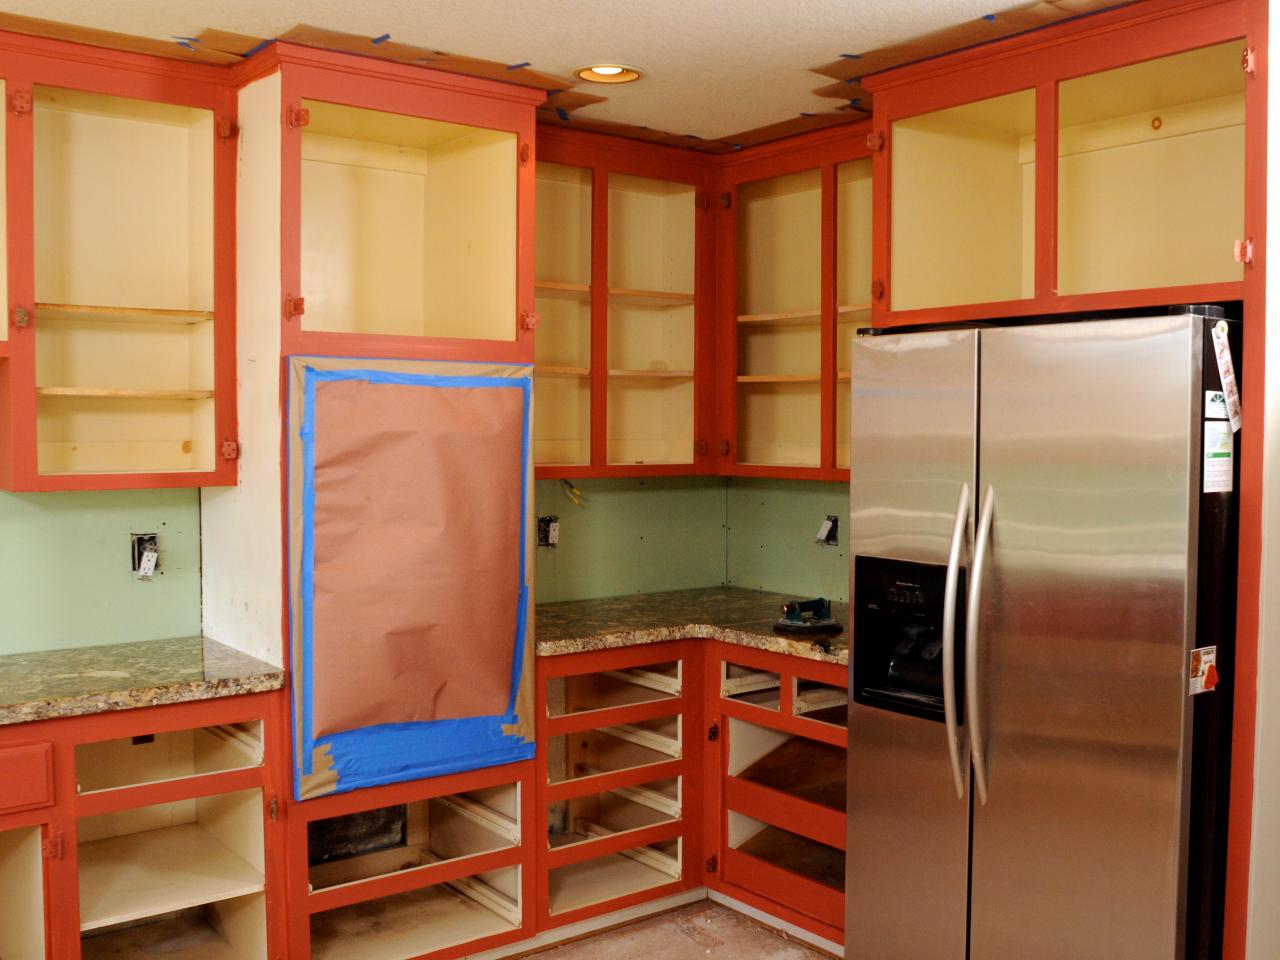 How To Paint Kitchen Cabinets In A Two Tone Finish How Tos Diy